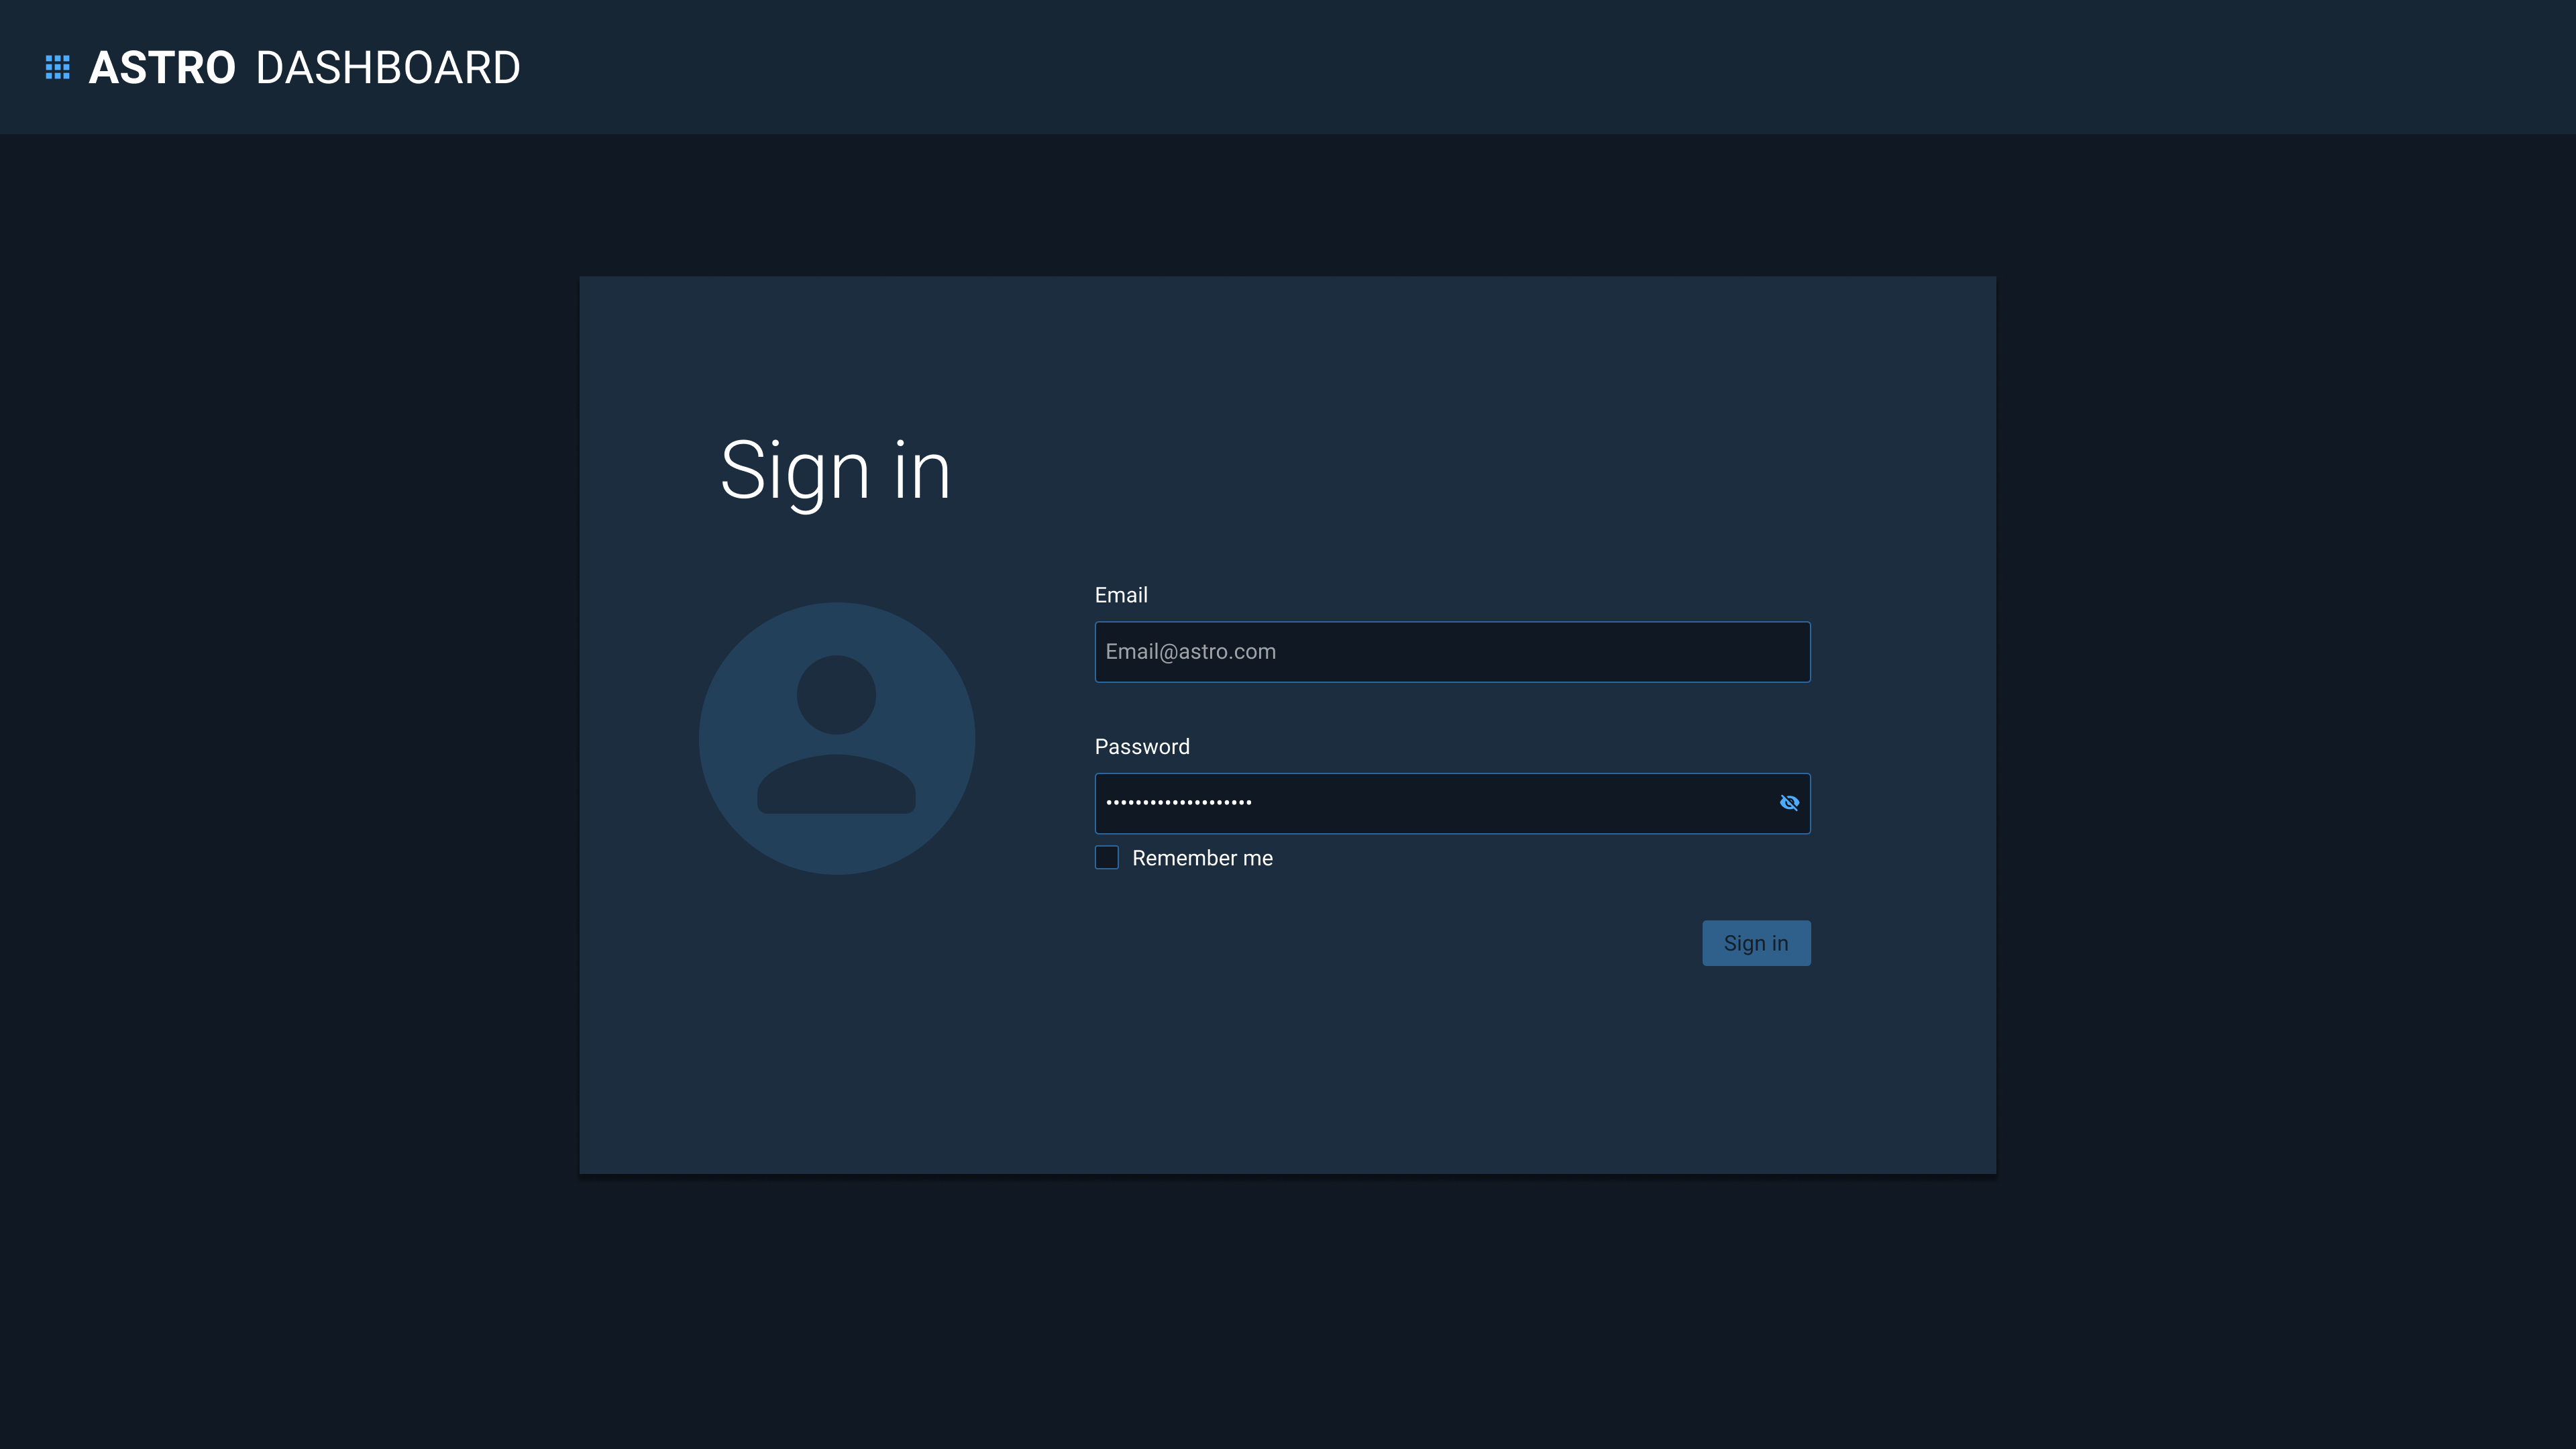 Example of a full-page, Simple Sign In screen